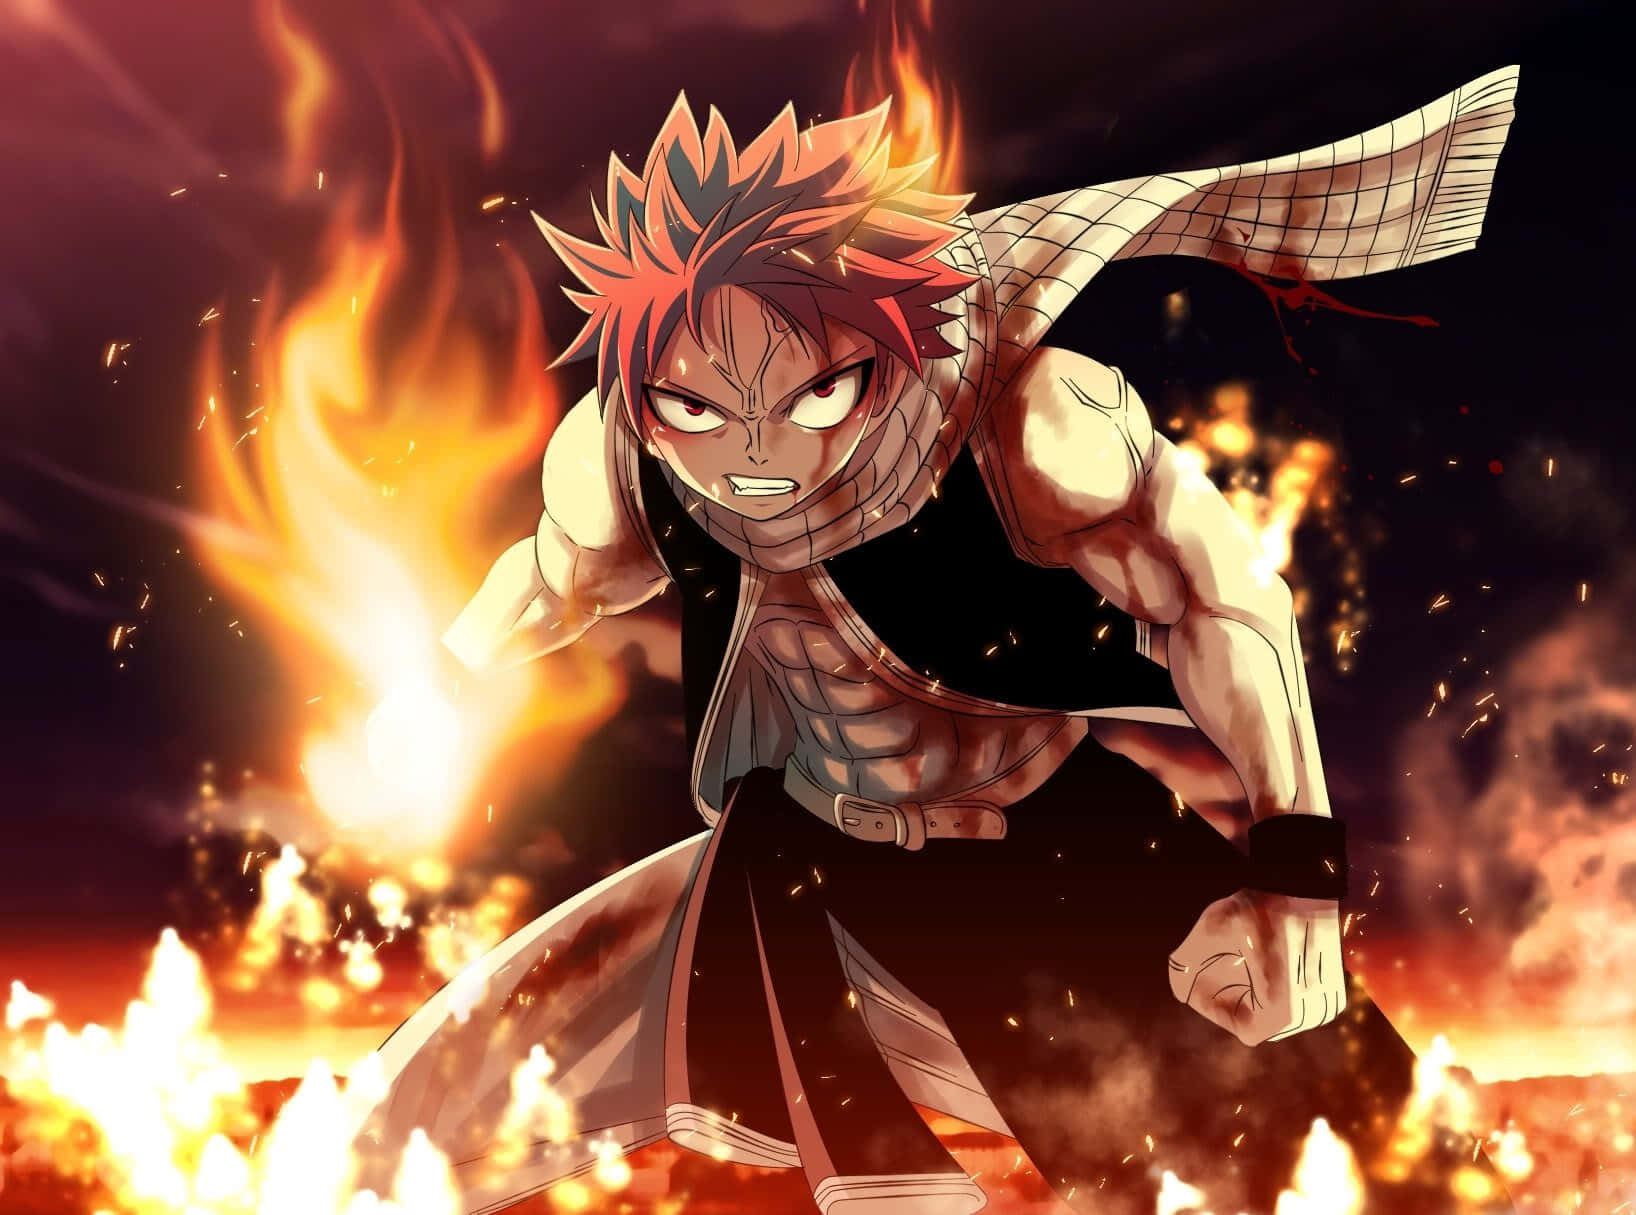 Explore the world of Fairy Tail!